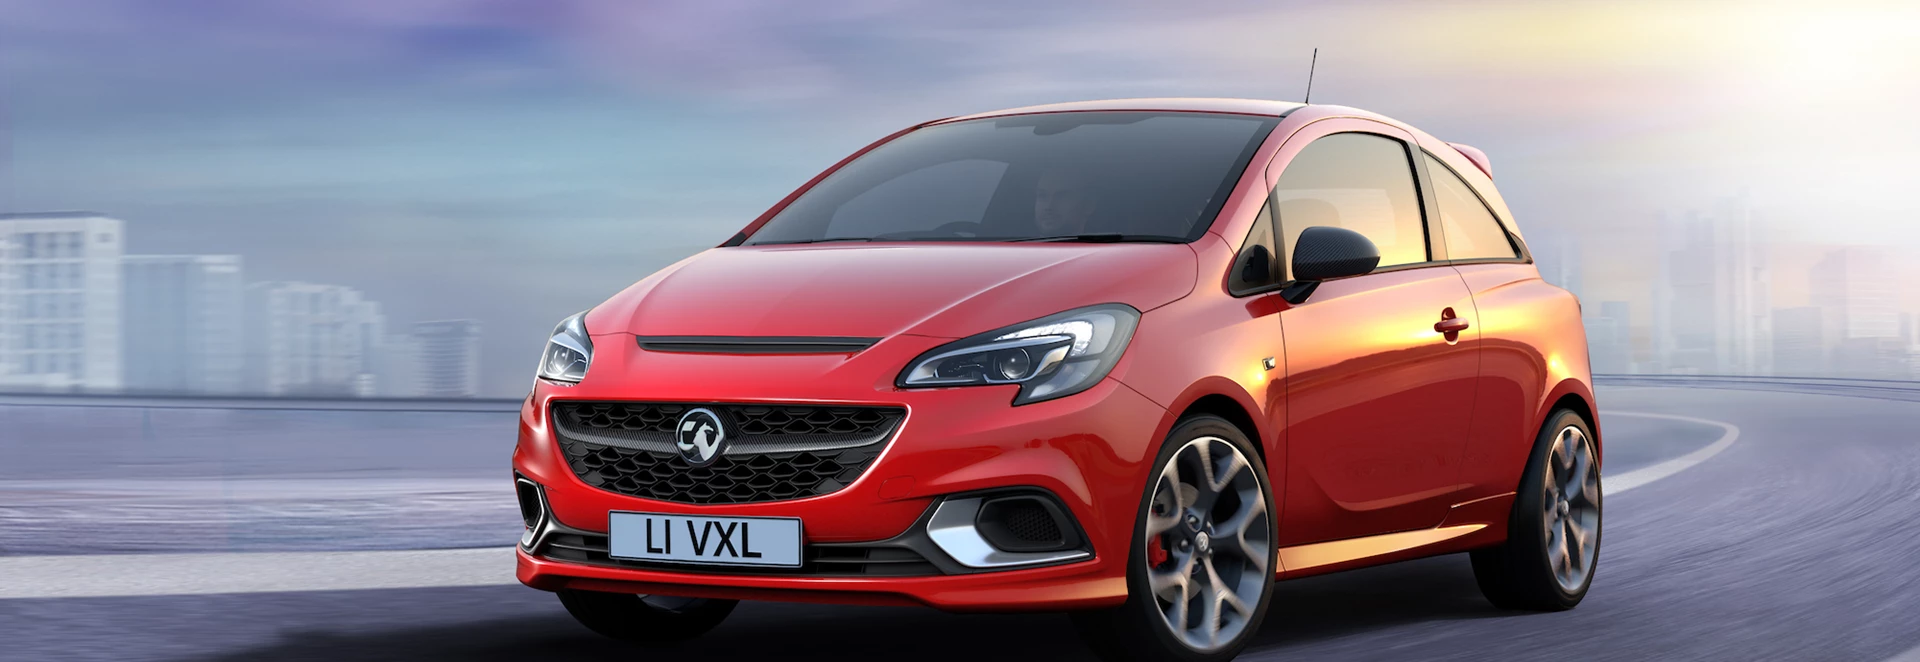 Vauxhall Corsa GSi returns after 25 years and it’s better than ever! 